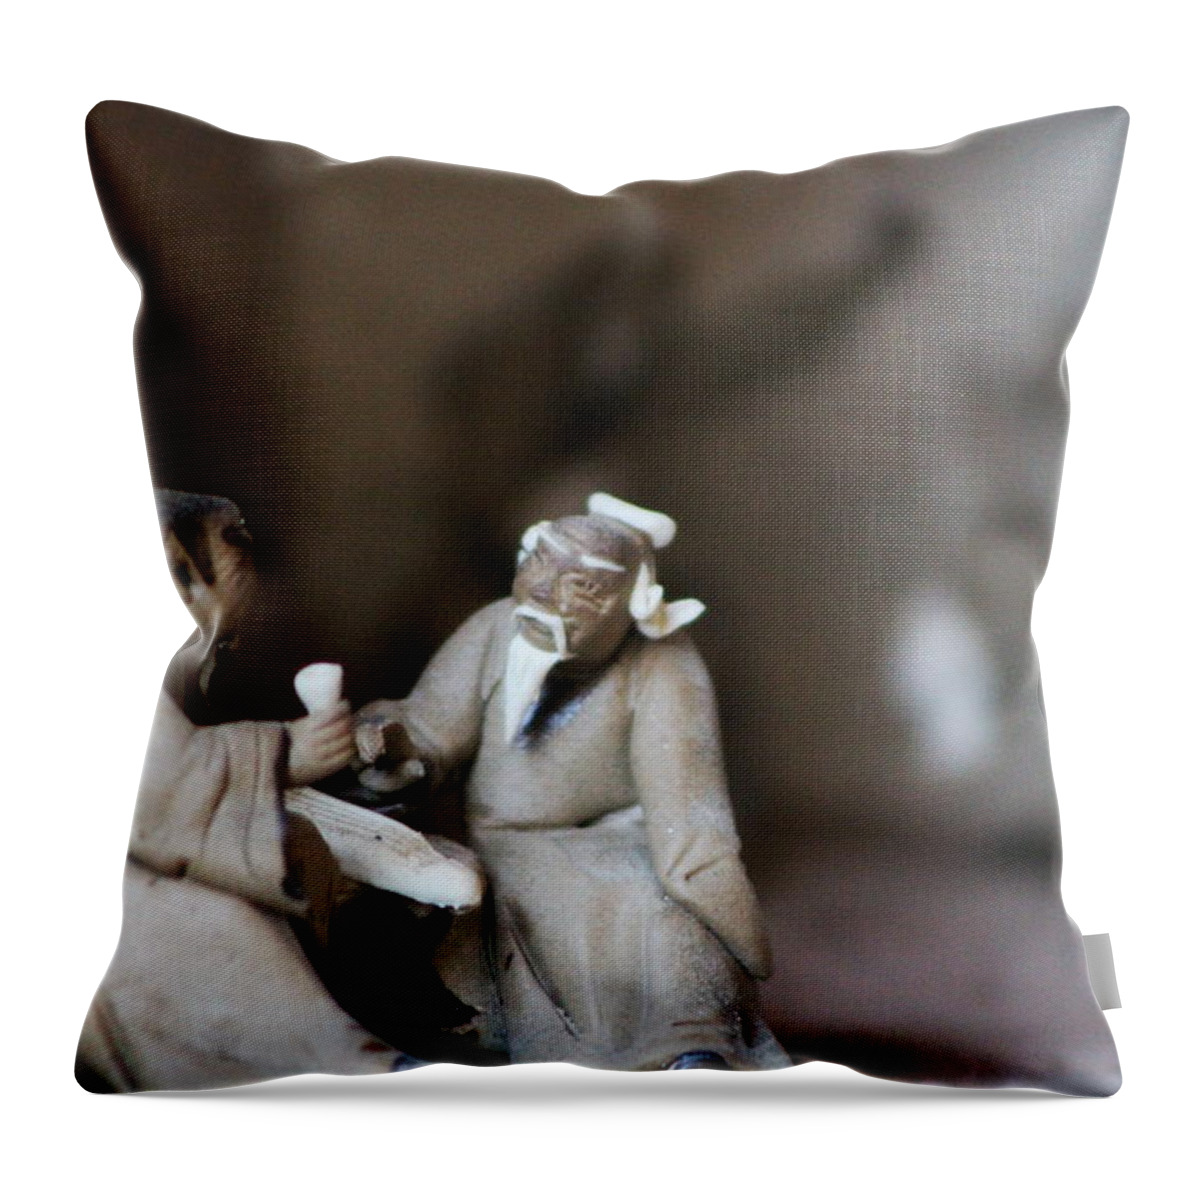 Japanese Mud Men Throw Pillow featuring the photograph Artistry and Musicians Mud Men by Colleen Cornelius